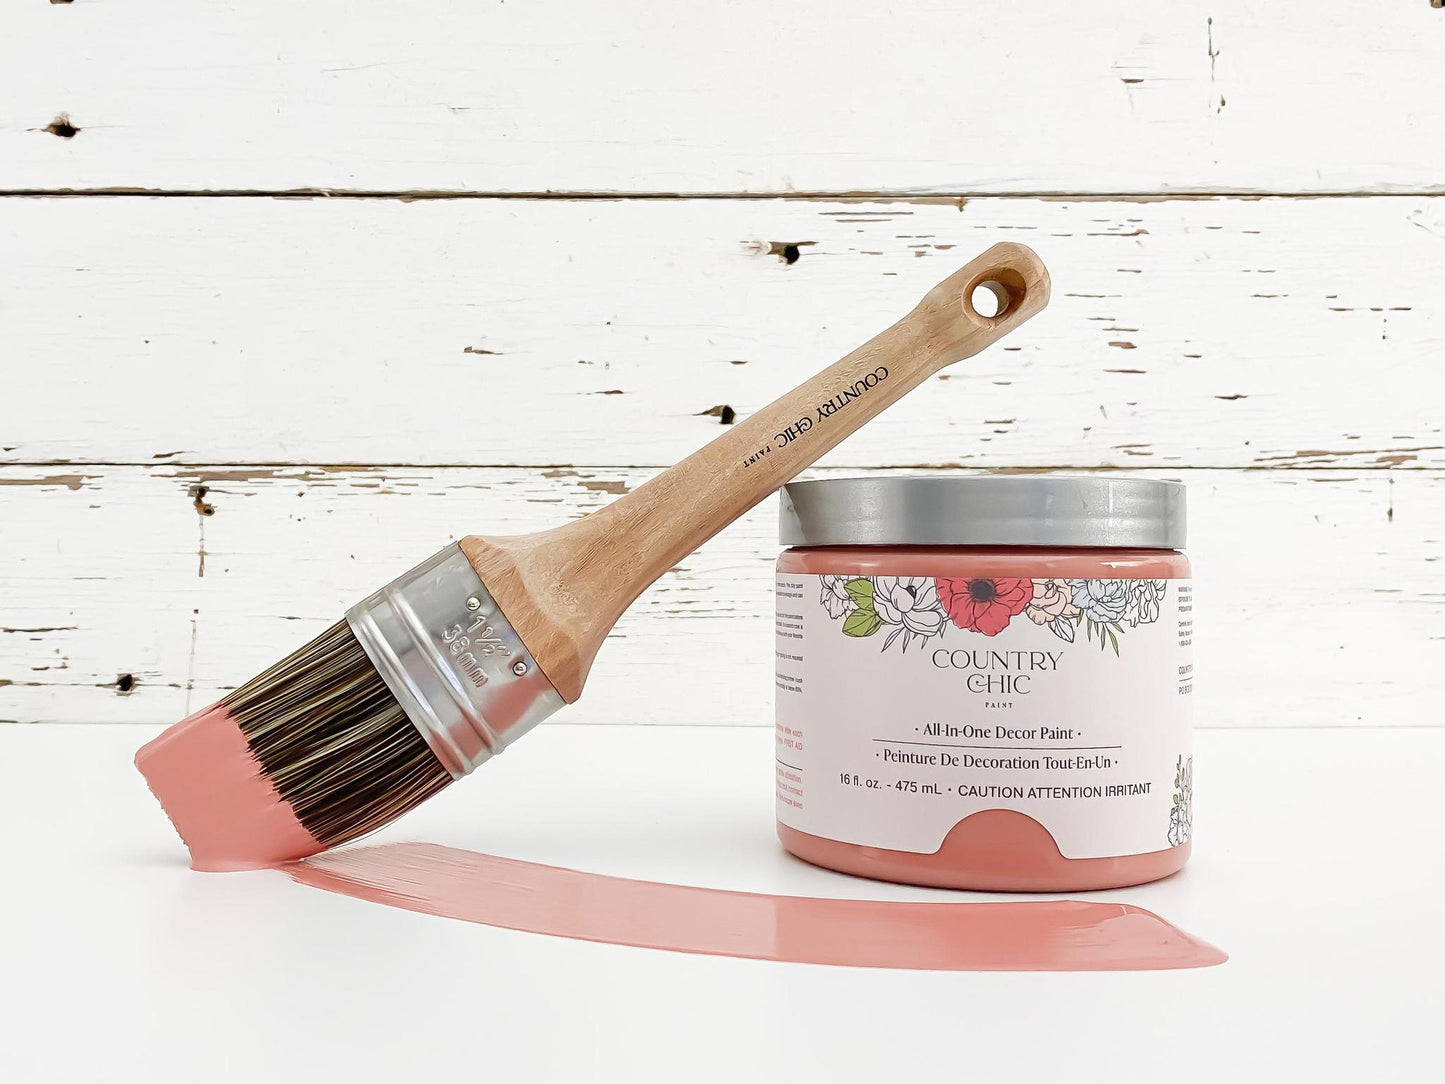 Country Chic - All in One Decor Paint - Peachy Keen